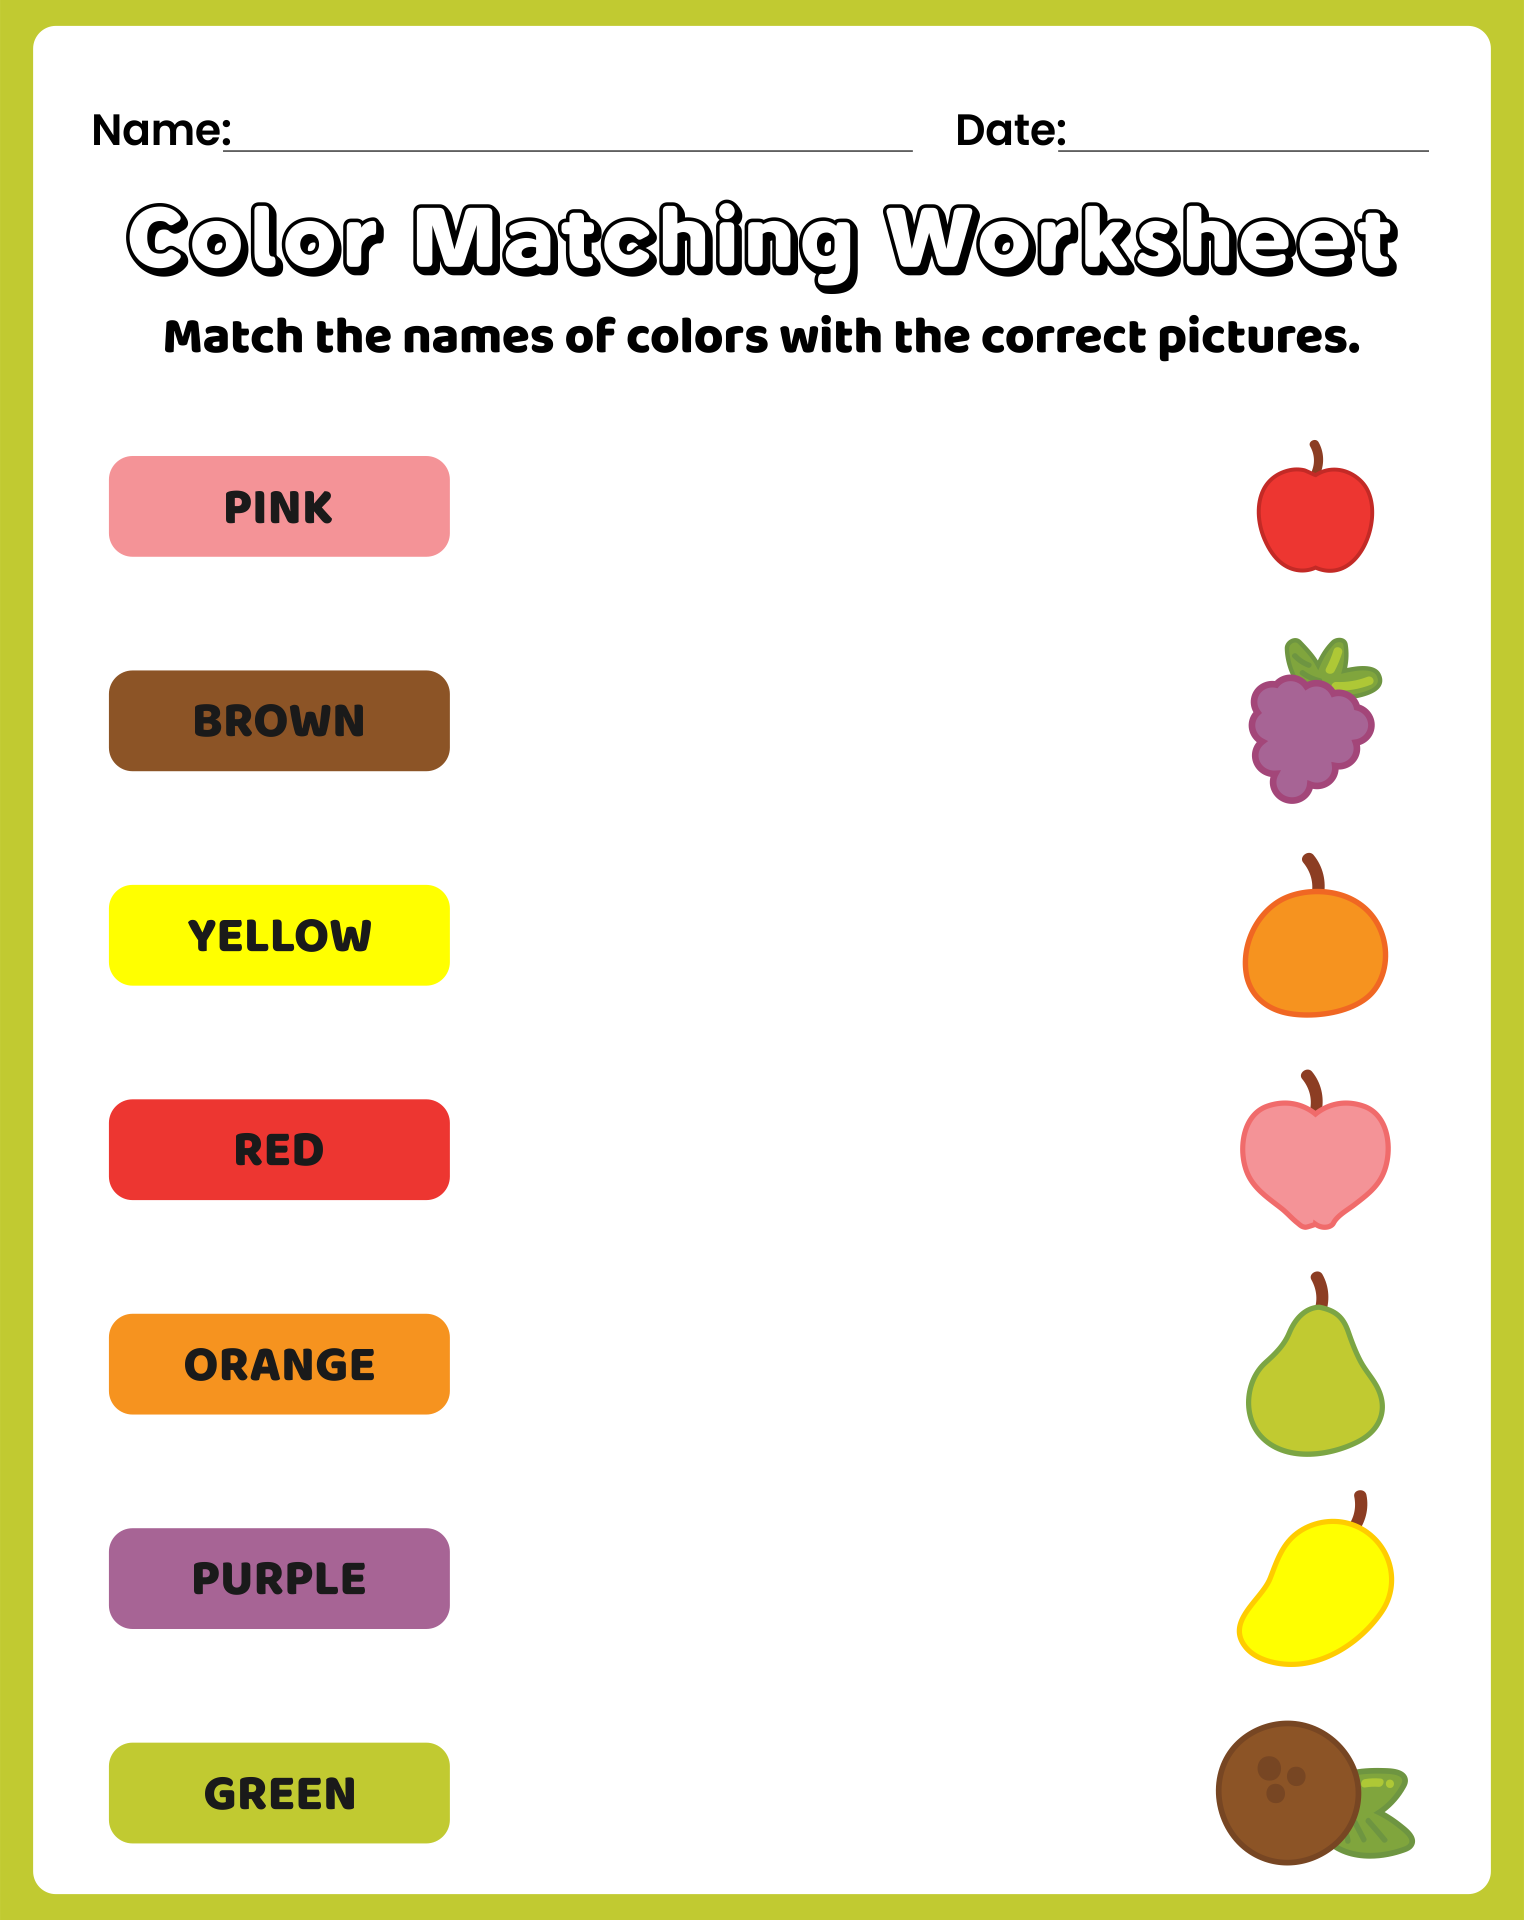 Printable Color Matching Worksheets